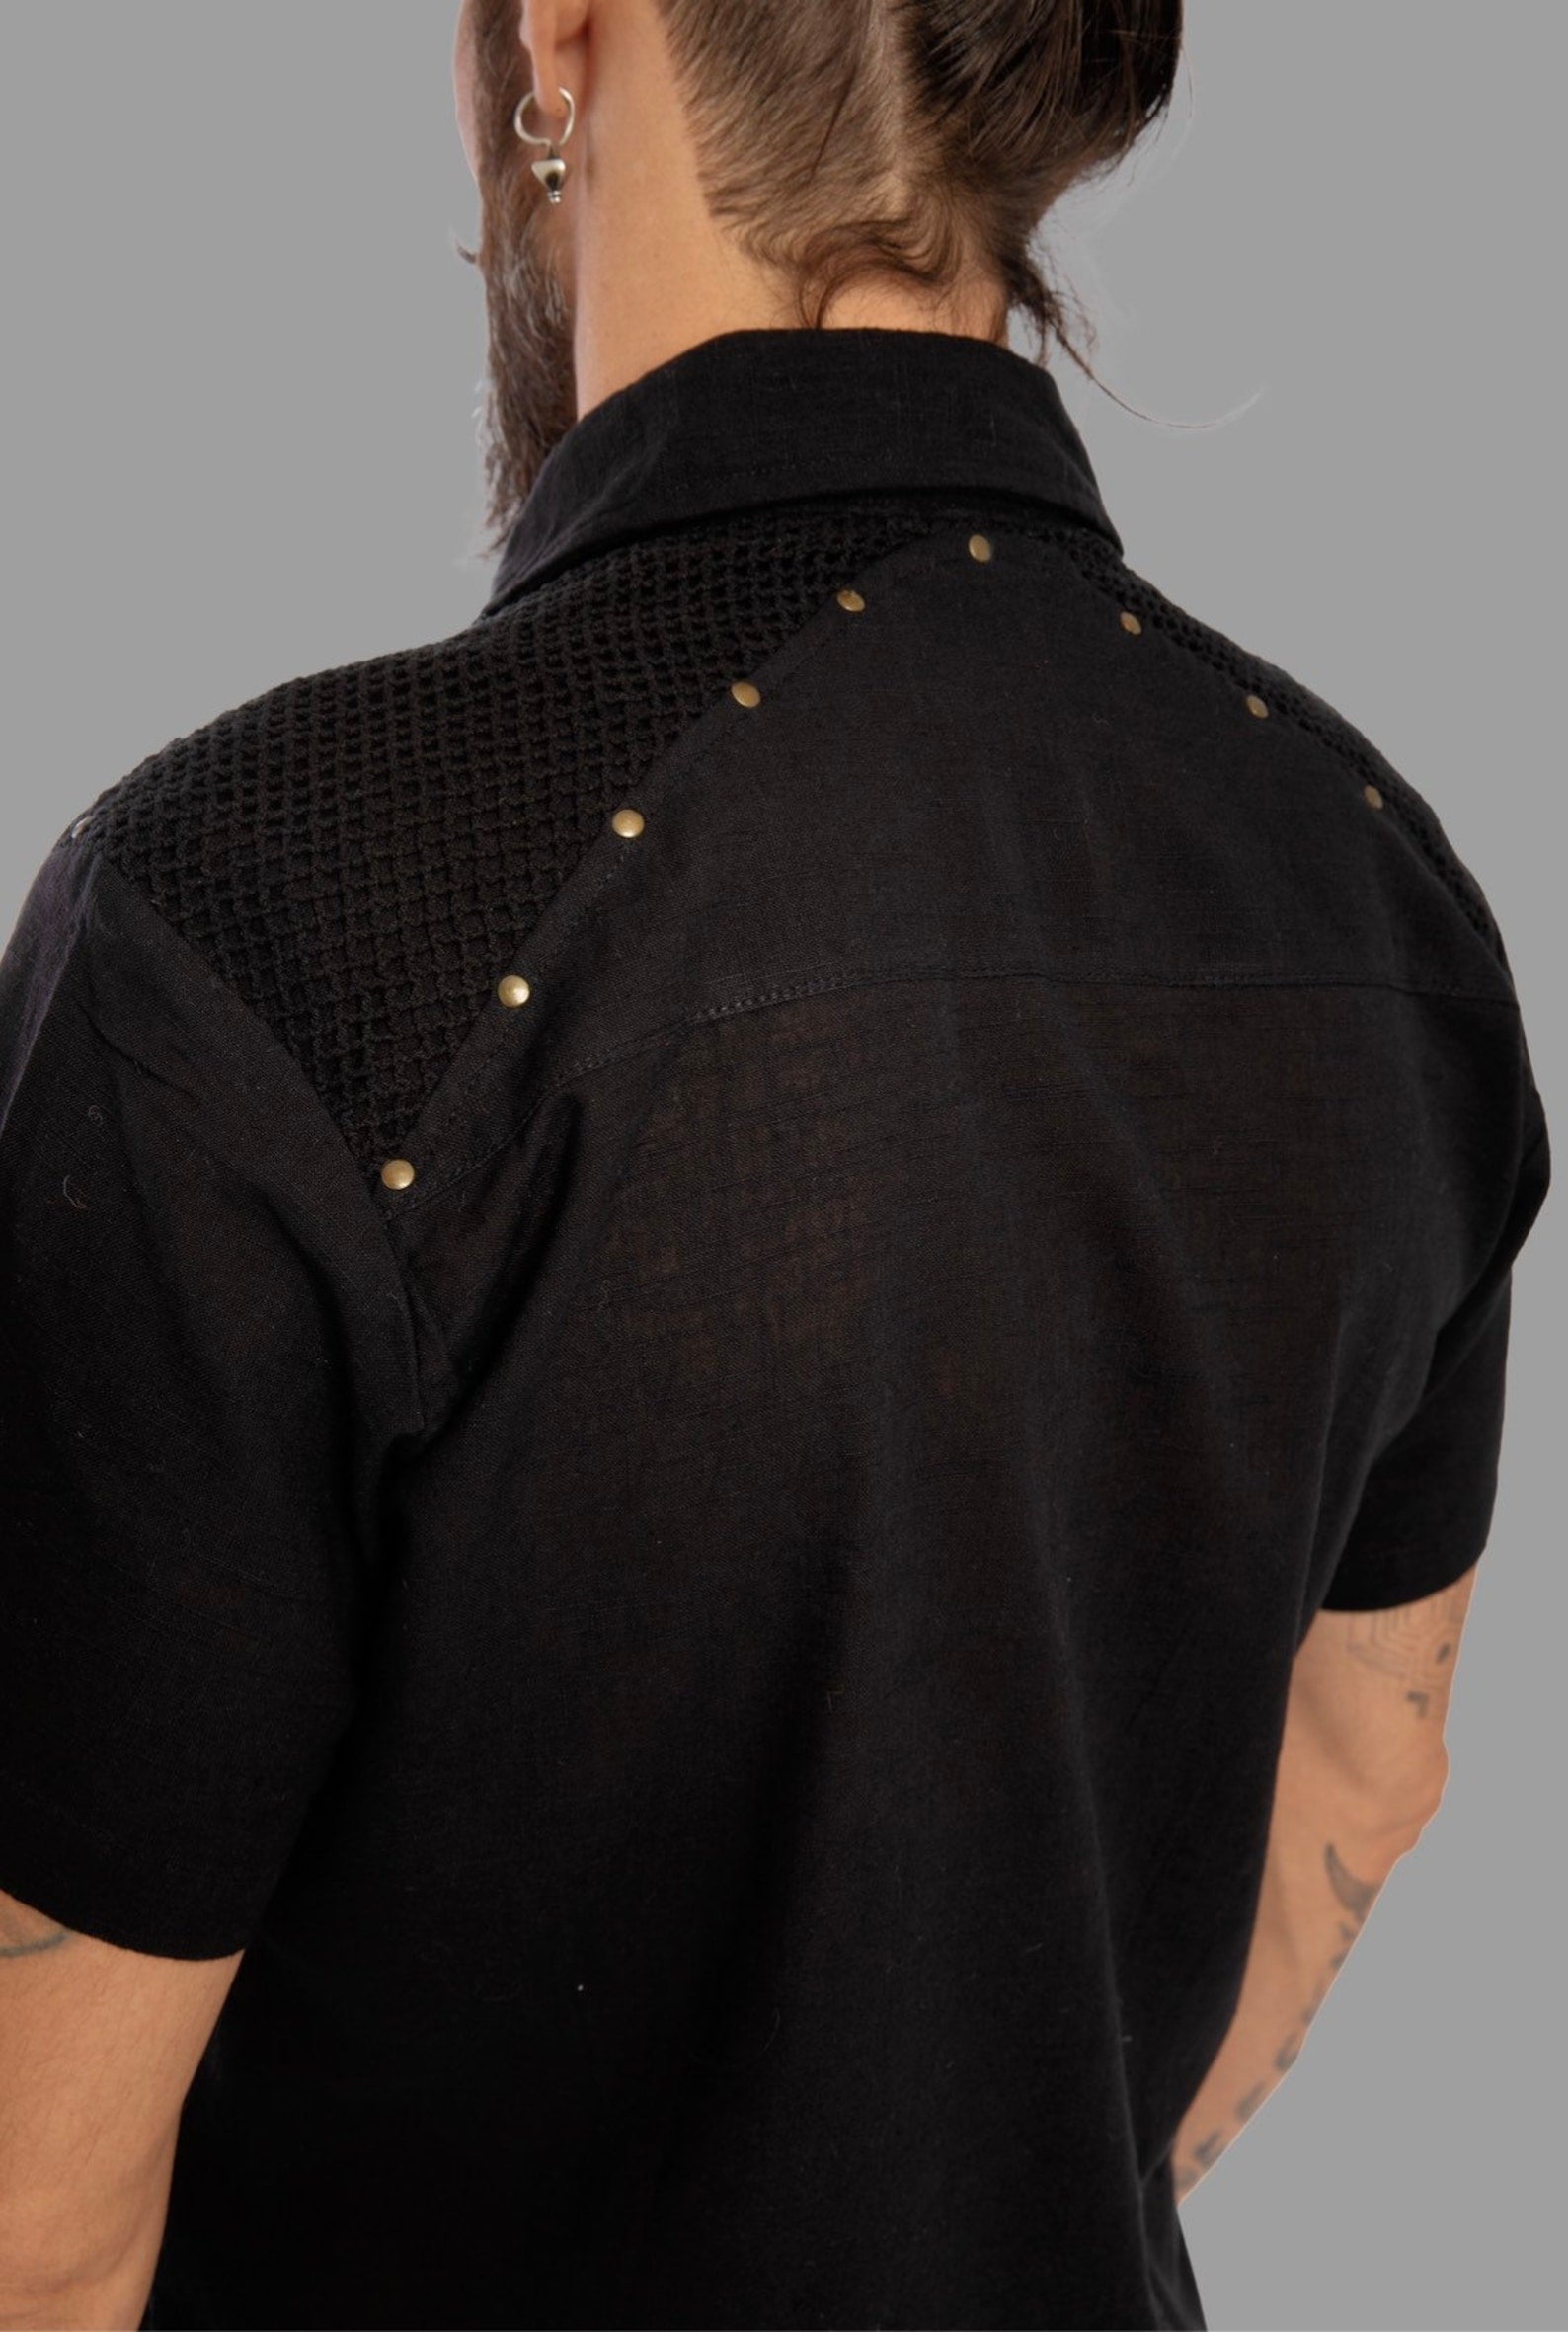 Short sleeve shirt in 100% cotton fabric. With net and brass studs details on the shoulders.